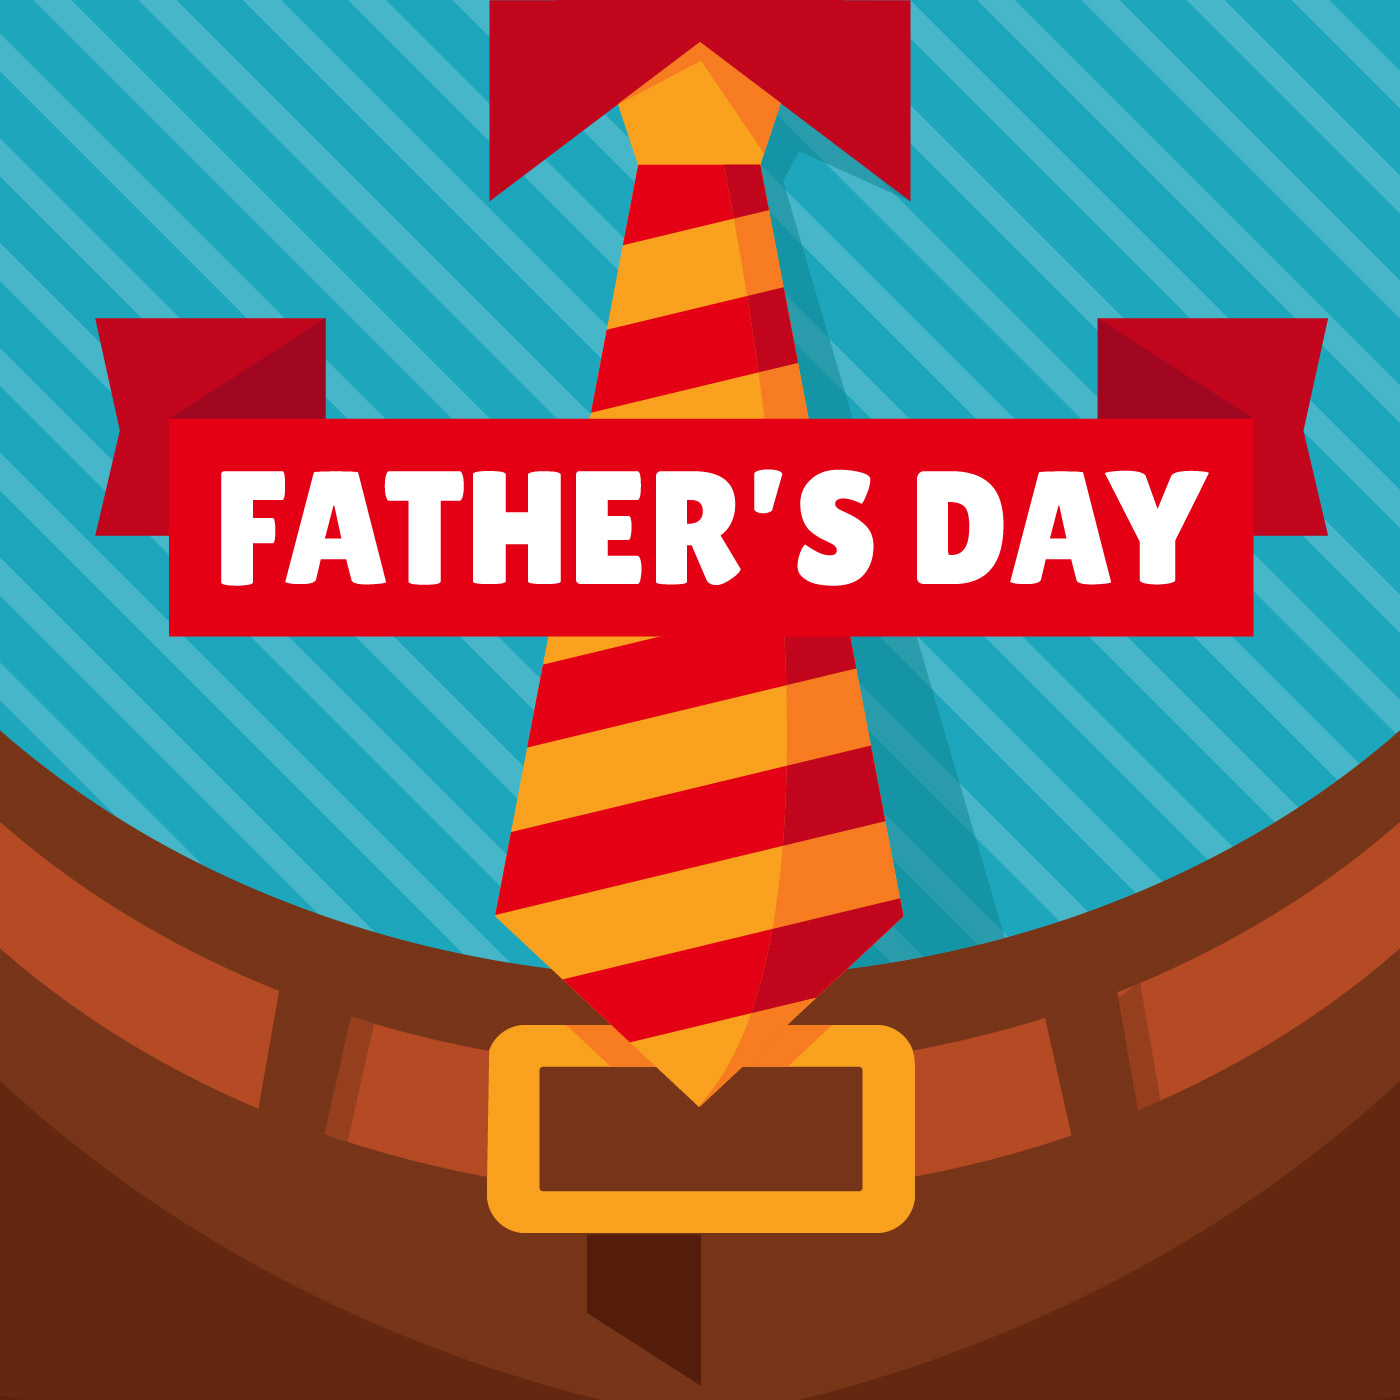 Download Happy Father's Day Design Vector - Download Free Vectors ...